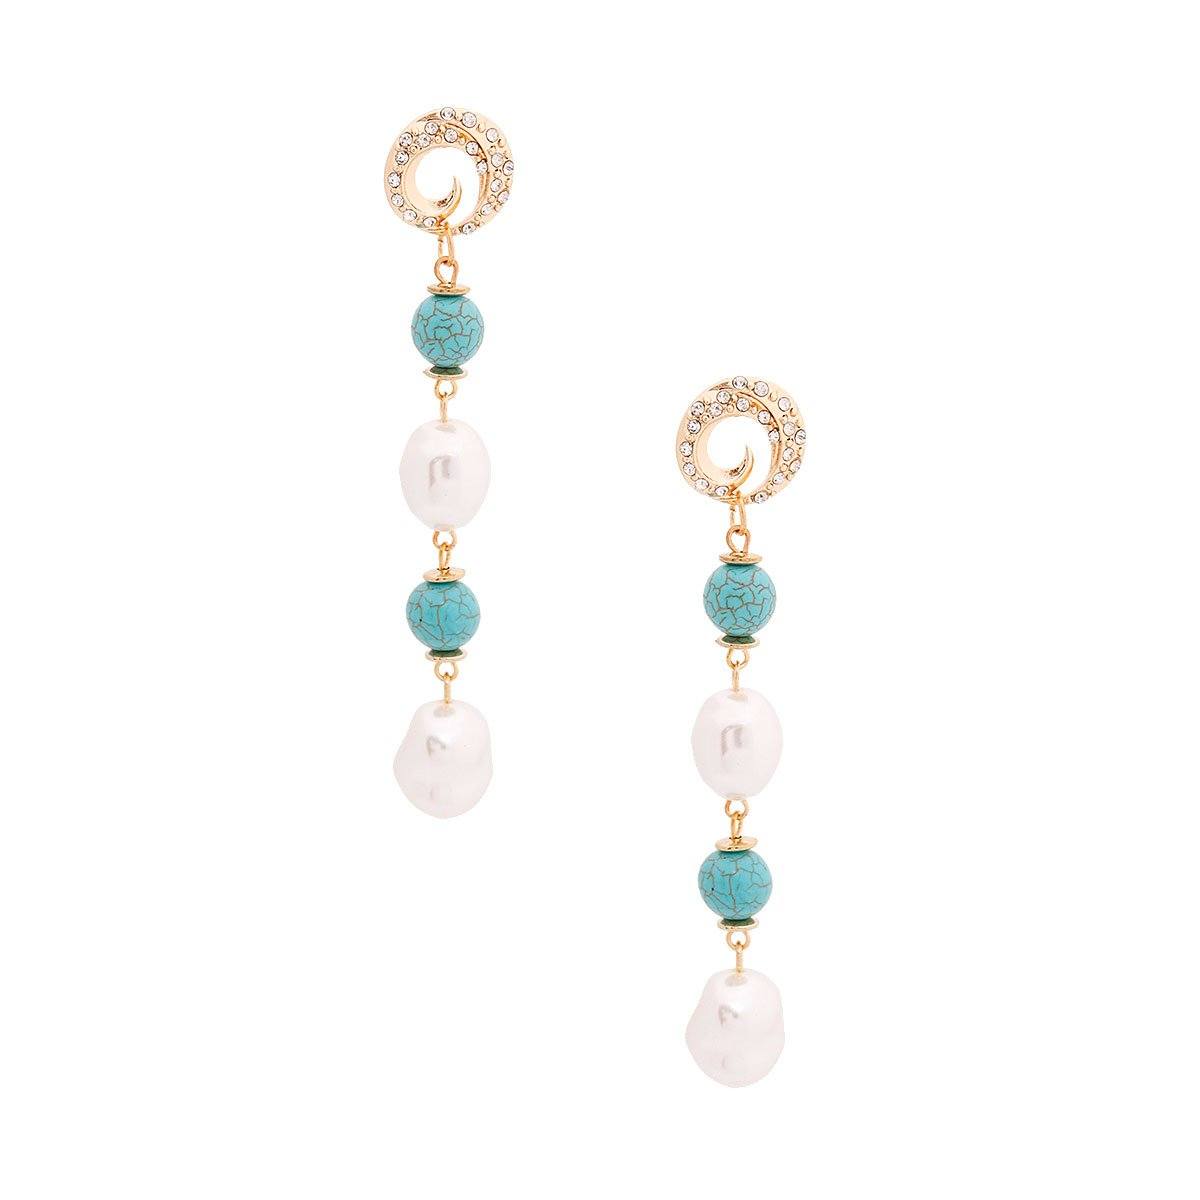 Cracked Turquoise Pearl Earrings